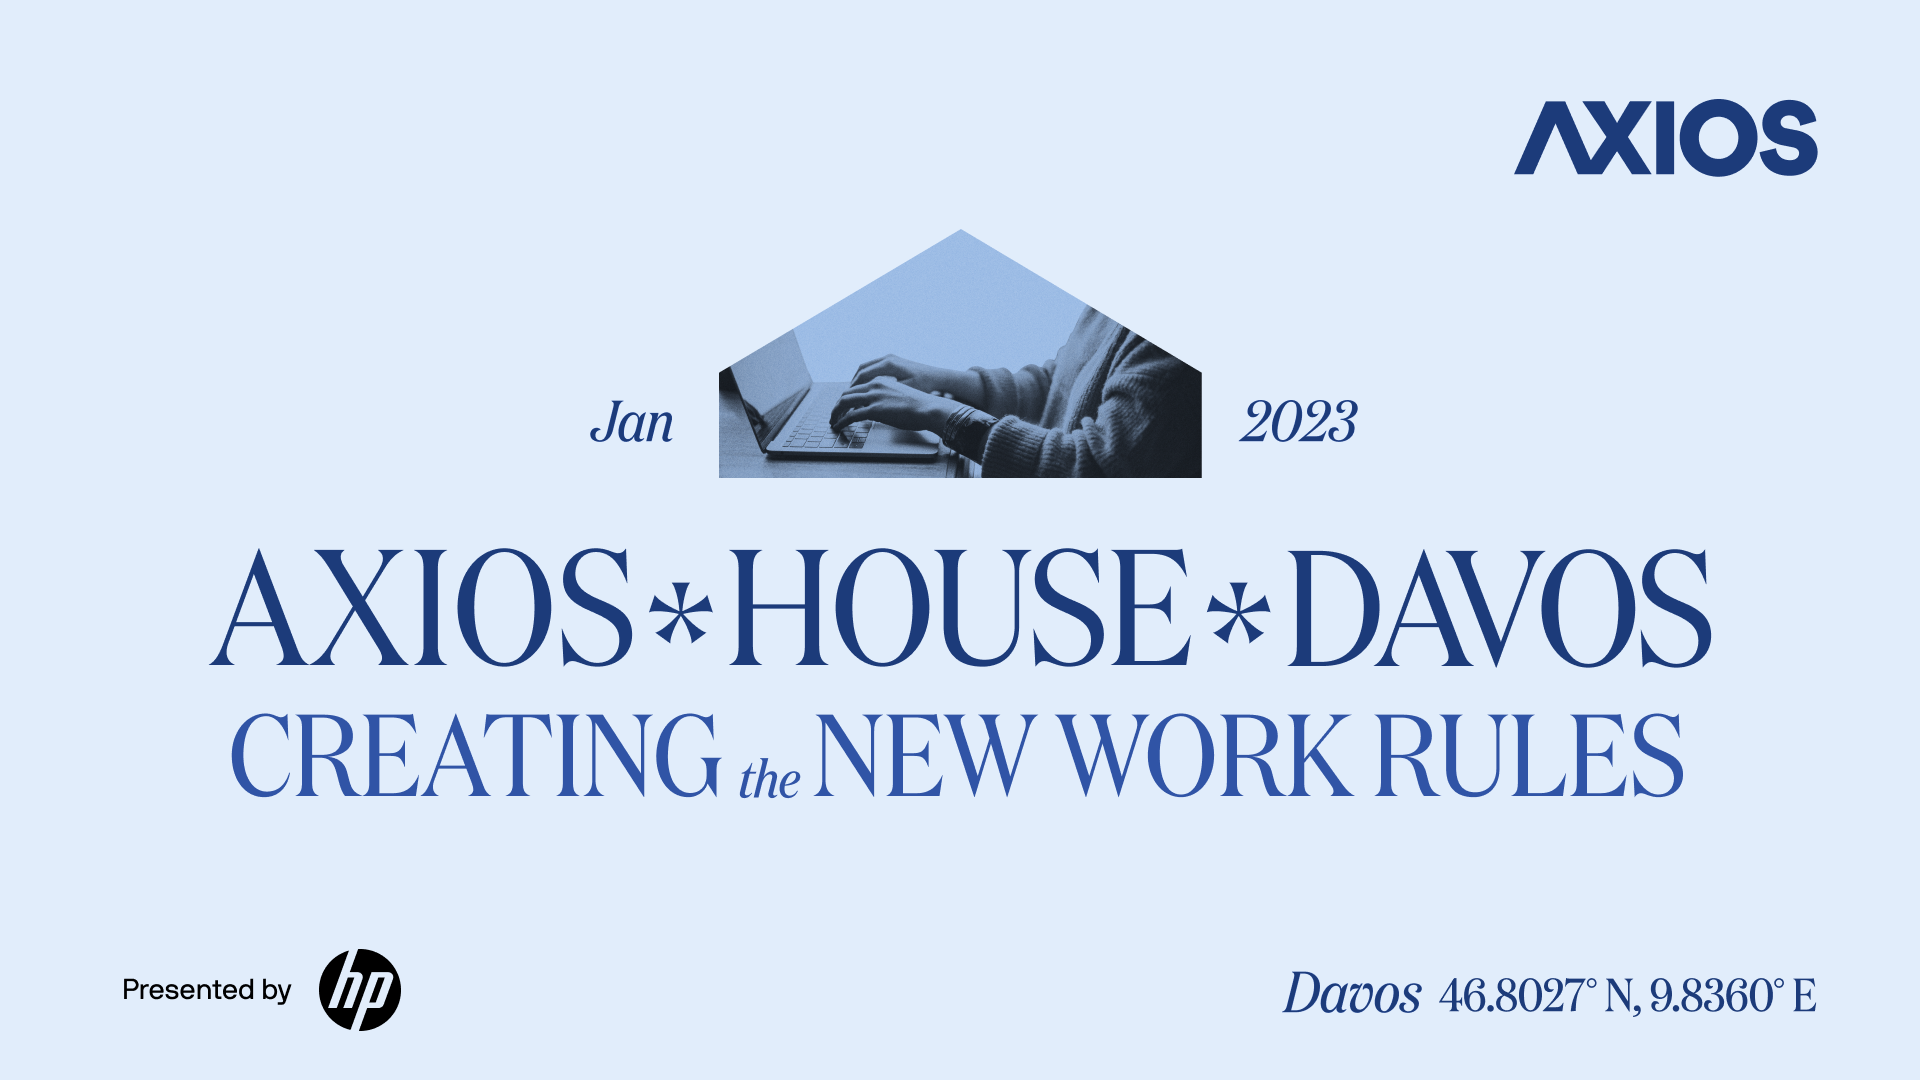 Axios House at Davos: Creating the New Work Rules